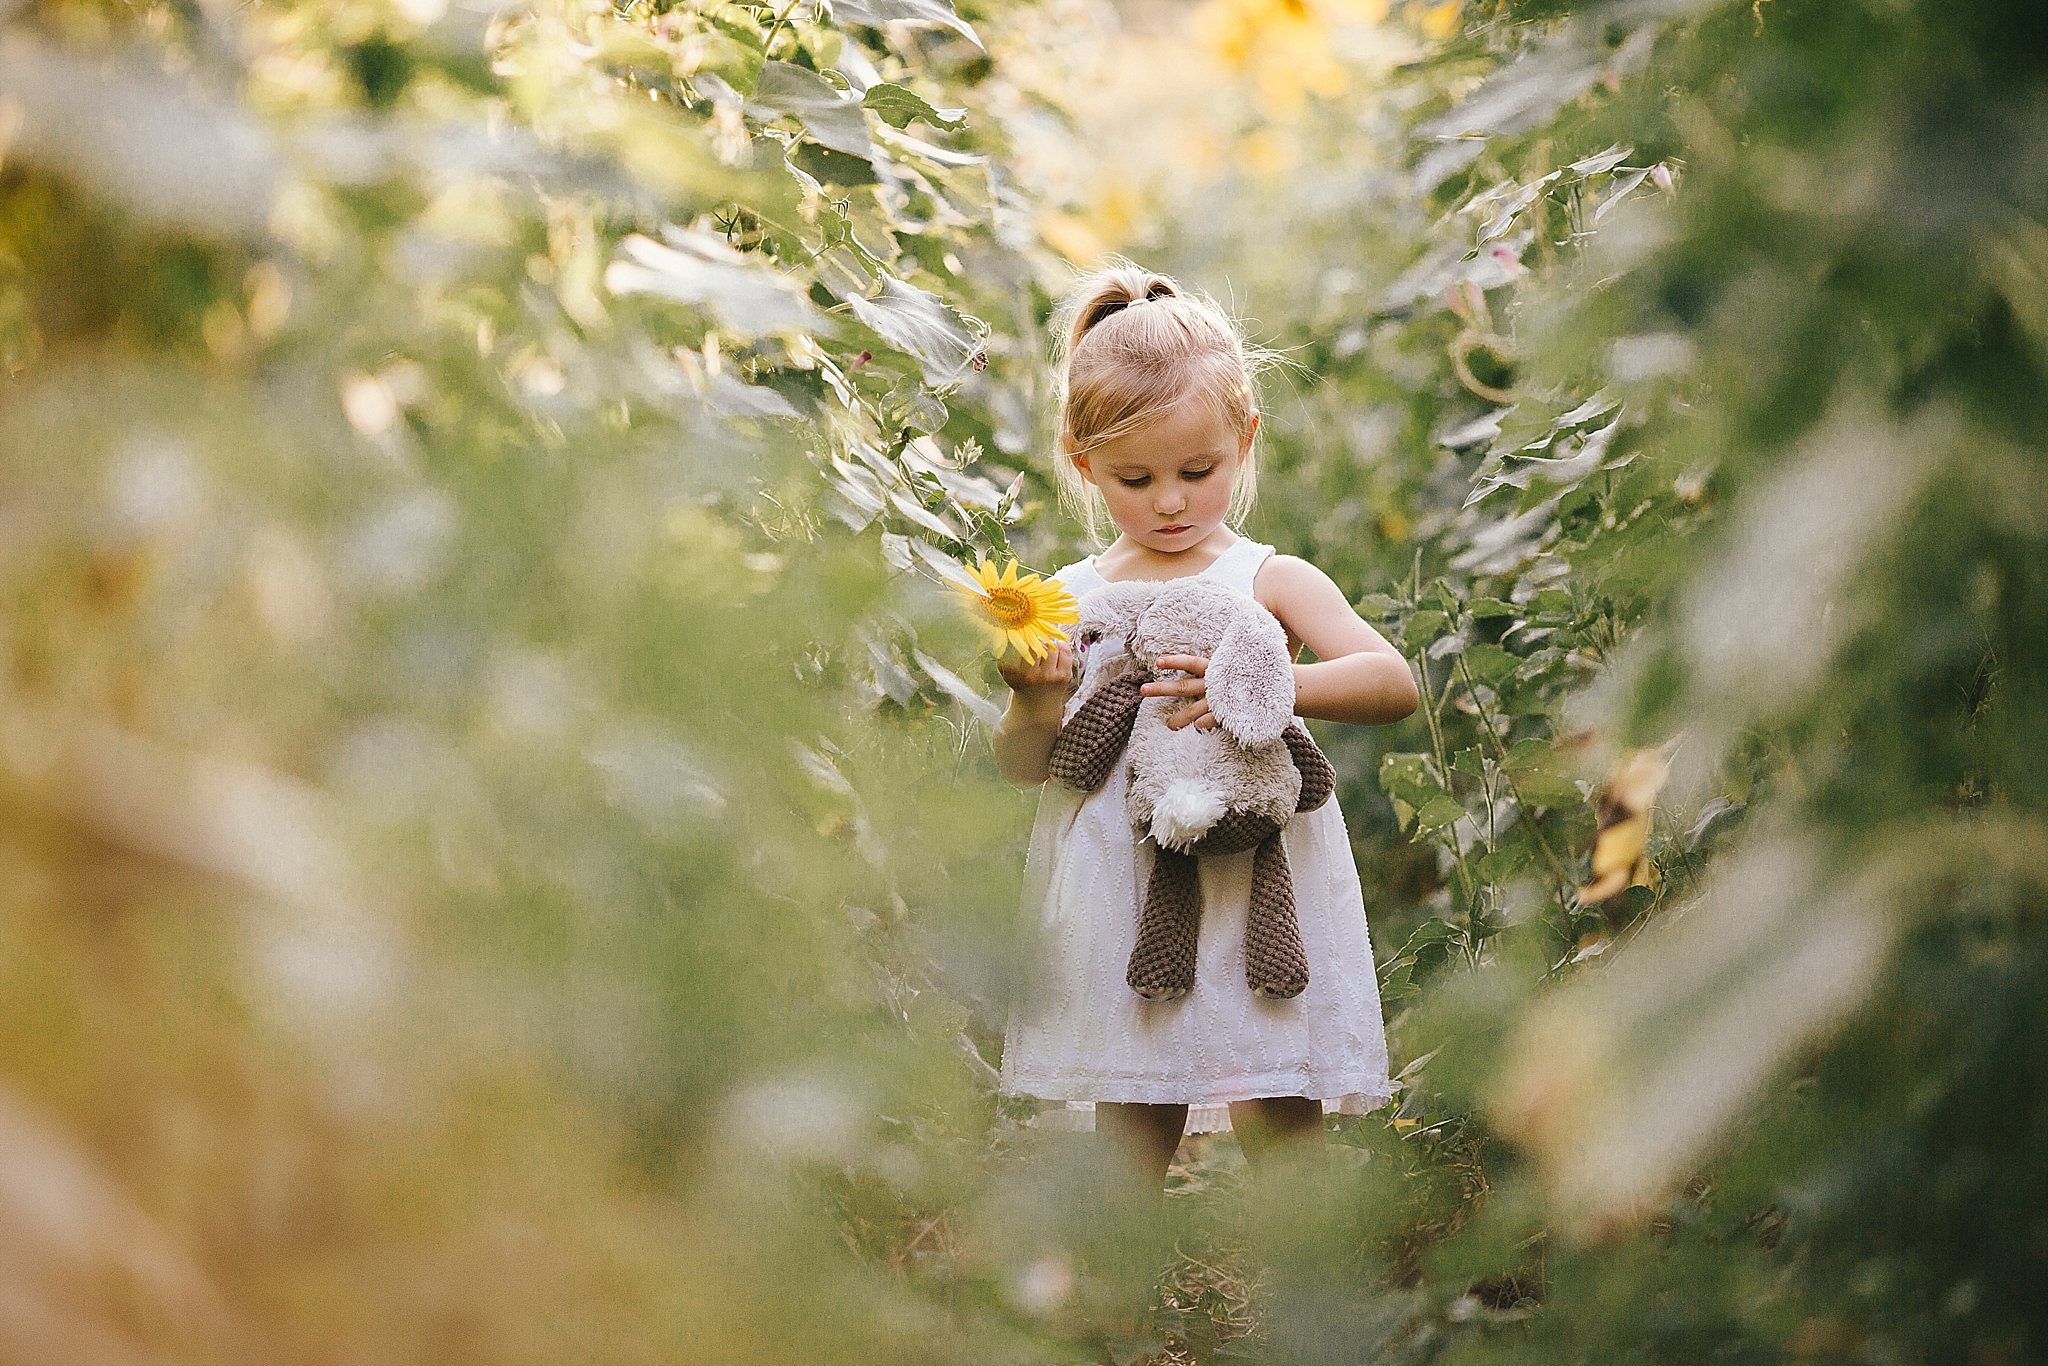 Sunflower Fields in Knoxville| Erin Morrison Photography www.erinmorrisonphotography.com